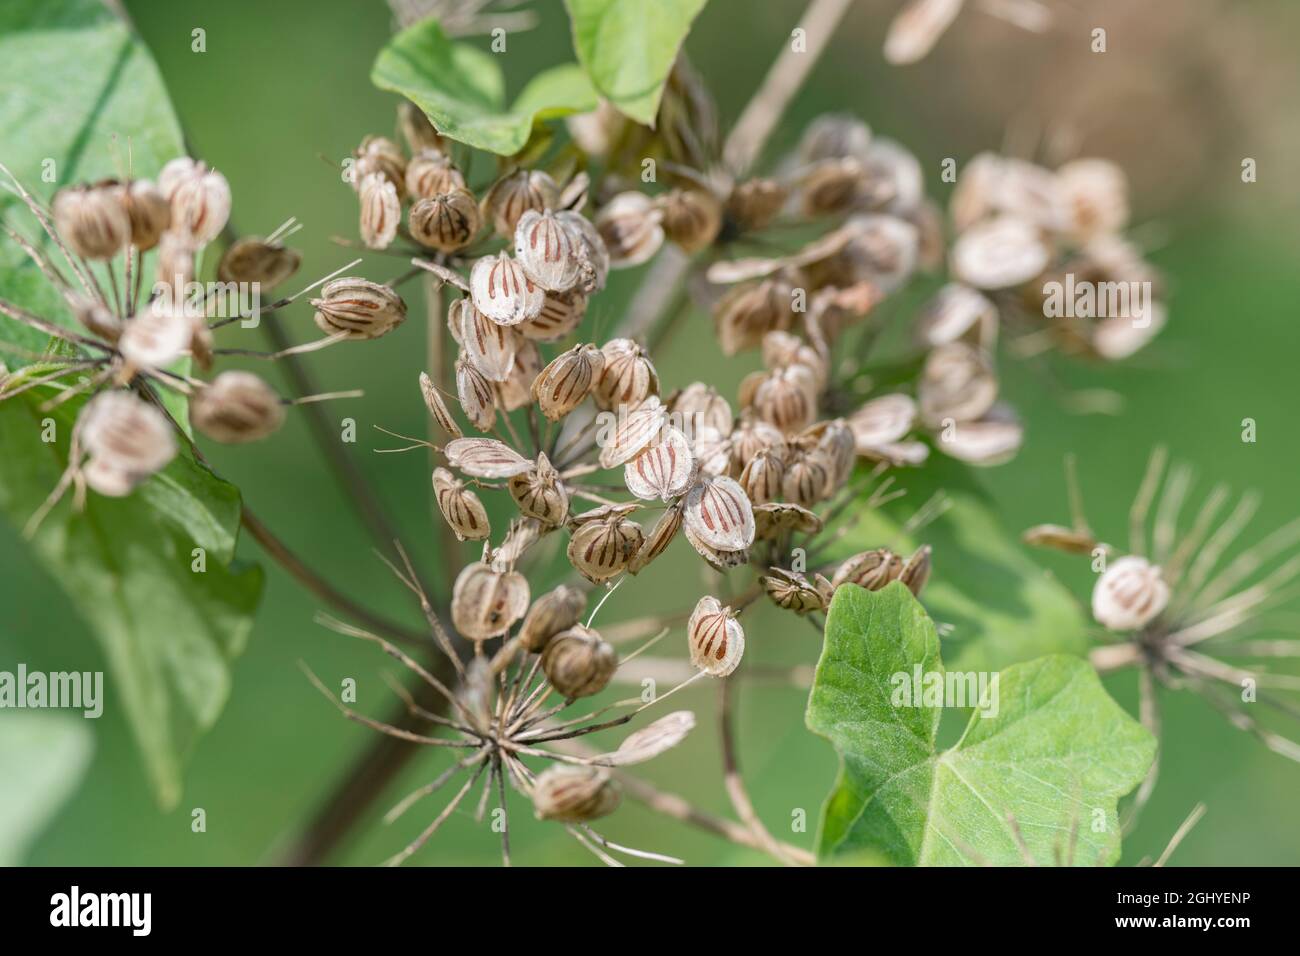 Close-up of mature ripe seeds of Hogweed / Heracleum sphondylium showing streaked vittae. Cow parsley family. Common weed in the UK. Stock Photo